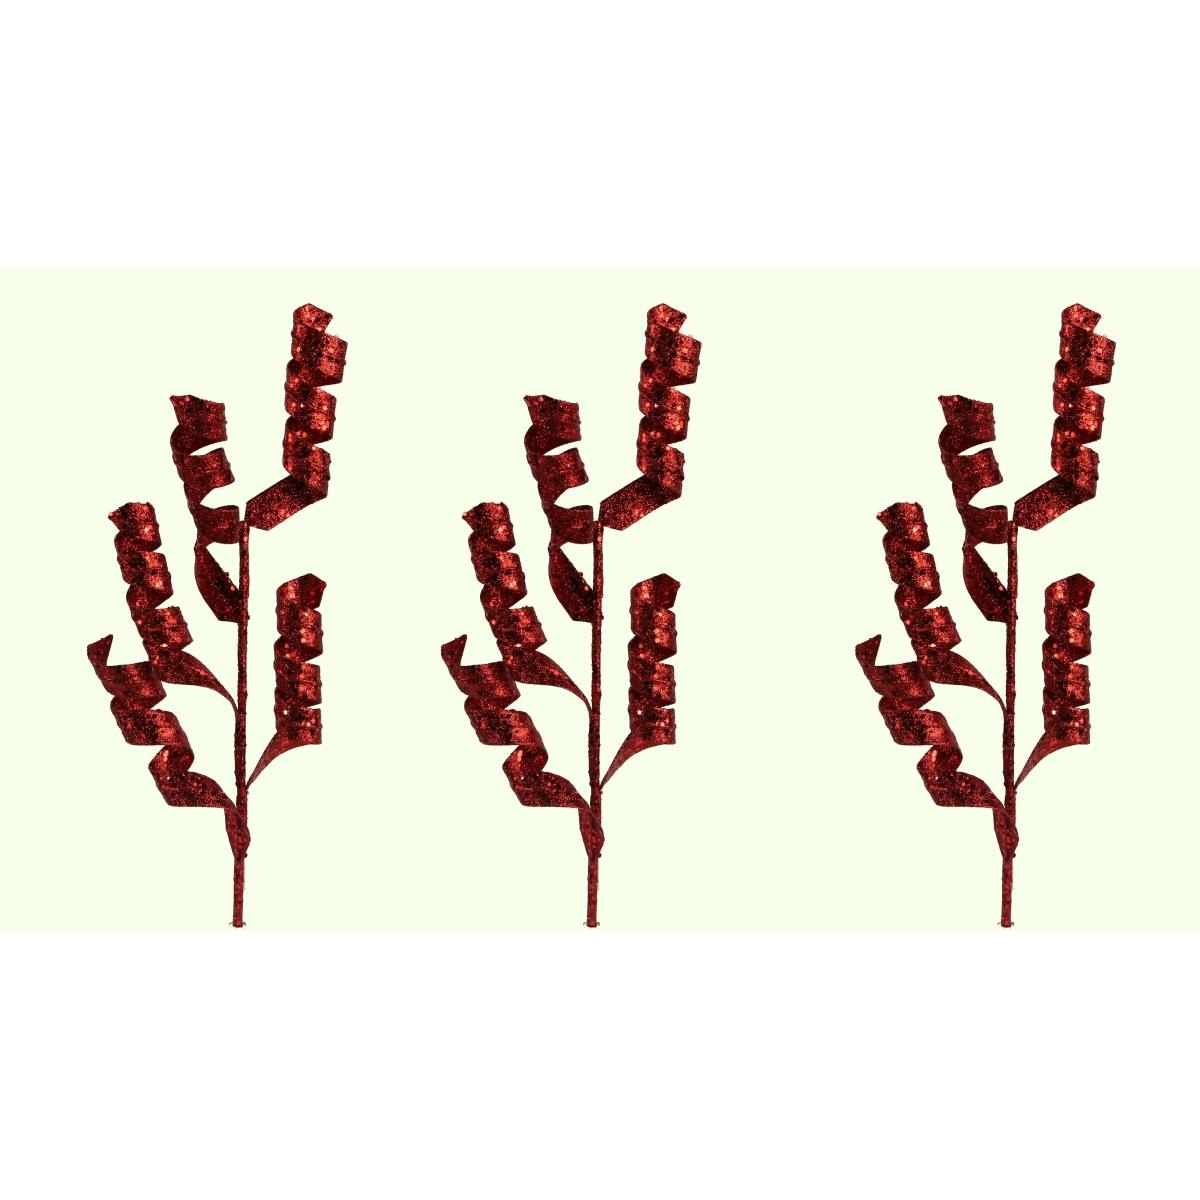 Admired By Nature Gxl7707-red-3 26 In. Glitter Spiral Spray Christmas Decor, Red - Set Of 3